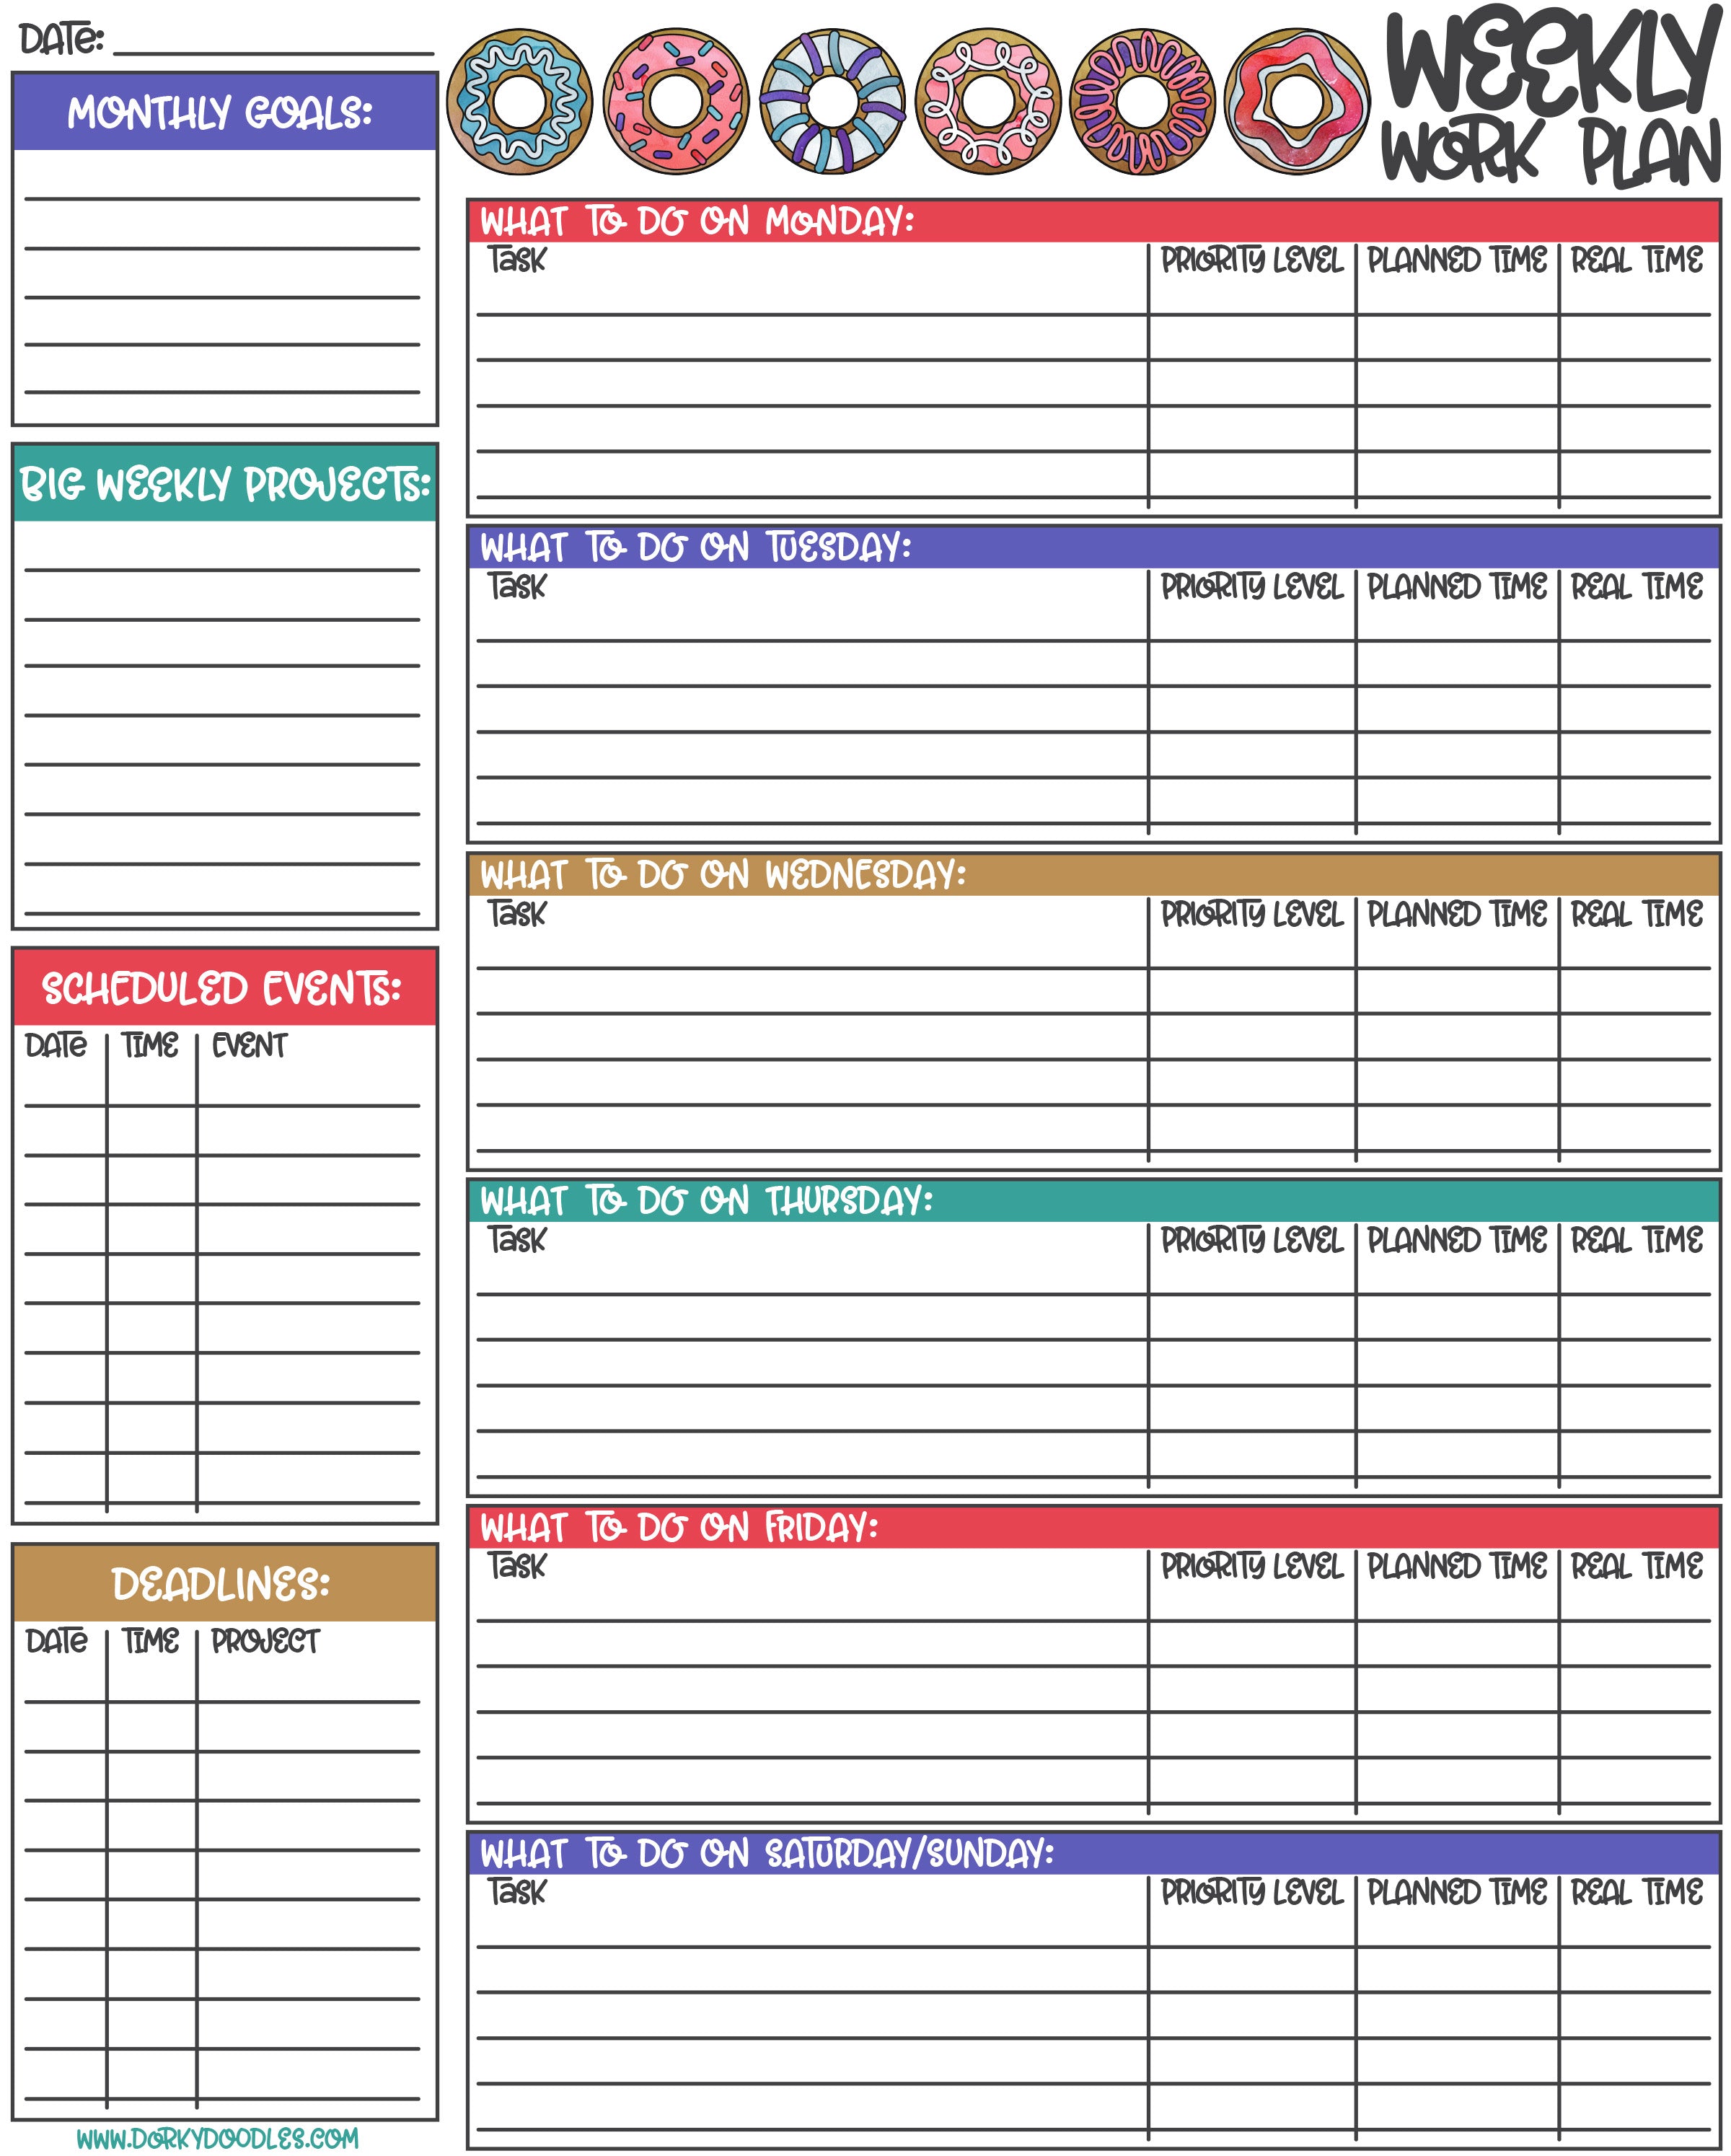 printable-weekly-planner-for-work-and-home-dorky-doodles